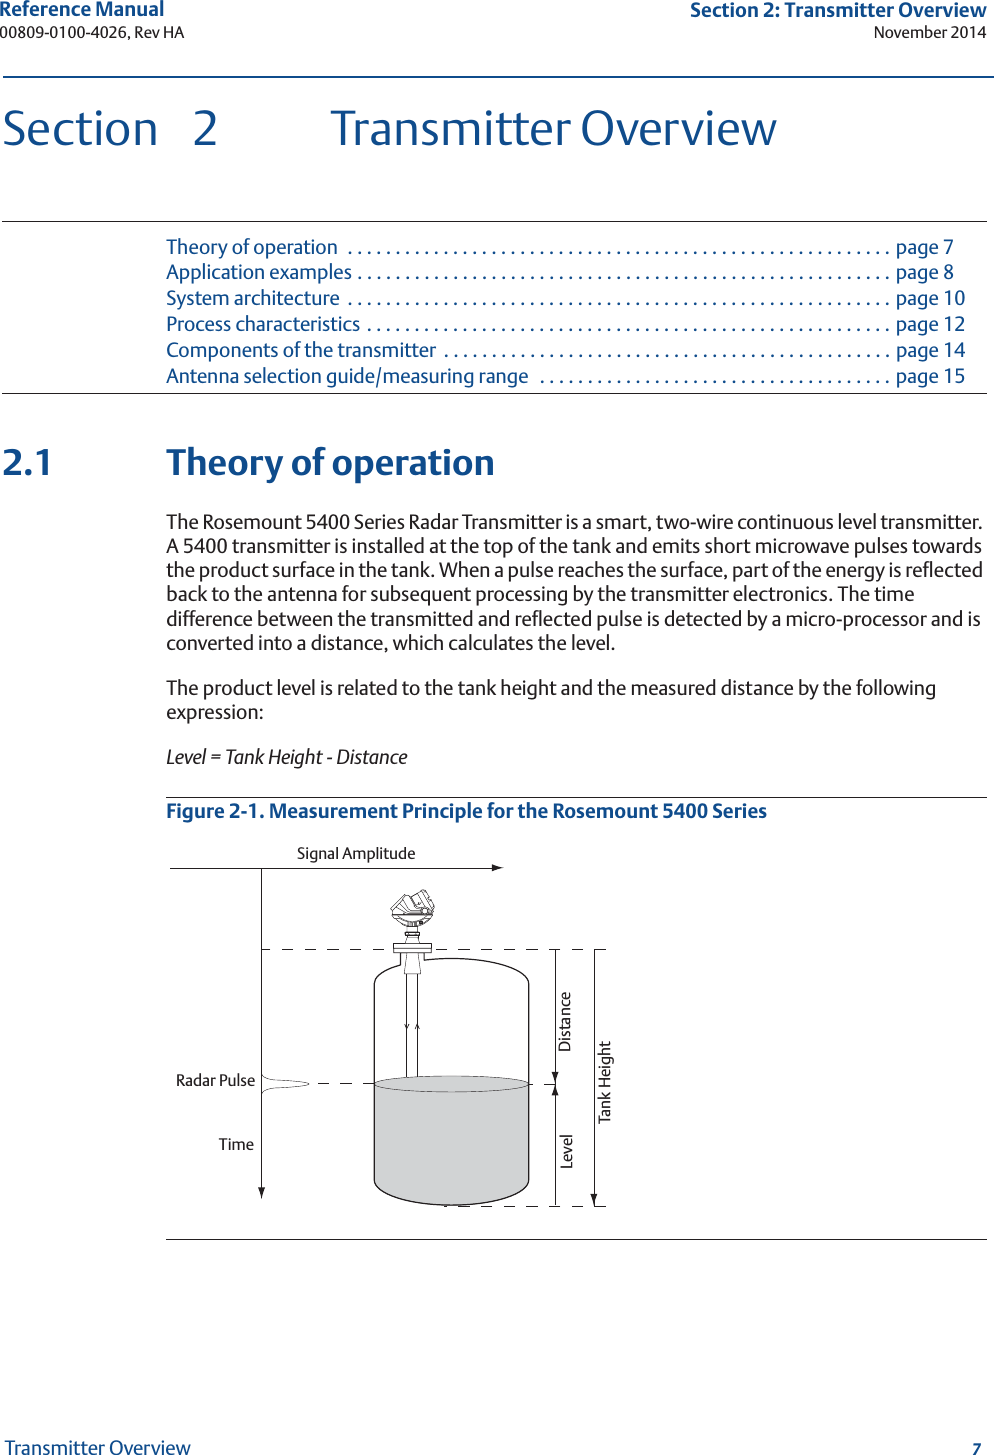 7Reference Manual 00809-0100-4026, Rev HASection 2: Transmitter OverviewNovember 2014Transmitter OverviewSection 2 Transmitter OverviewTheory of operation  . . . . . . . . . . . . . . . . . . . . . . . . . . . . . . . . . . . . . . . . . . . . . . . . . . . . . . . . . page 7Application examples . . . . . . . . . . . . . . . . . . . . . . . . . . . . . . . . . . . . . . . . . . . . . . . . . . . . . . . . page 8System architecture  . . . . . . . . . . . . . . . . . . . . . . . . . . . . . . . . . . . . . . . . . . . . . . . . . . . . . . . . . page 10Process characteristics . . . . . . . . . . . . . . . . . . . . . . . . . . . . . . . . . . . . . . . . . . . . . . . . . . . . . . . page 12Components of the transmitter  . . . . . . . . . . . . . . . . . . . . . . . . . . . . . . . . . . . . . . . . . . . . . . . page 14Antenna selection guide/measuring range   . . . . . . . . . . . . . . . . . . . . . . . . . . . . . . . . . . . . . page 152.1 Theory of operationThe Rosemount 5400 Series Radar Transmitter is a smart, two-wire continuous level transmitter. A 5400 transmitter is installed at the top of the tank and emits short microwave pulses towards the product surface in the tank. When a pulse reaches the surface, part of the energy is reflected back to the antenna for subsequent processing by the transmitter electronics. The time difference between the transmitted and reflected pulse is detected by a micro-processor and is converted into a distance, which calculates the level.The product level is related to the tank height and the measured distance by the following expression:Level = Tank Height - DistanceFigure 2-1. Measurement Principle for the Rosemount 5400 SeriesTimeLevel DistanceTank HeightSignal AmplitudeRadar Pulse